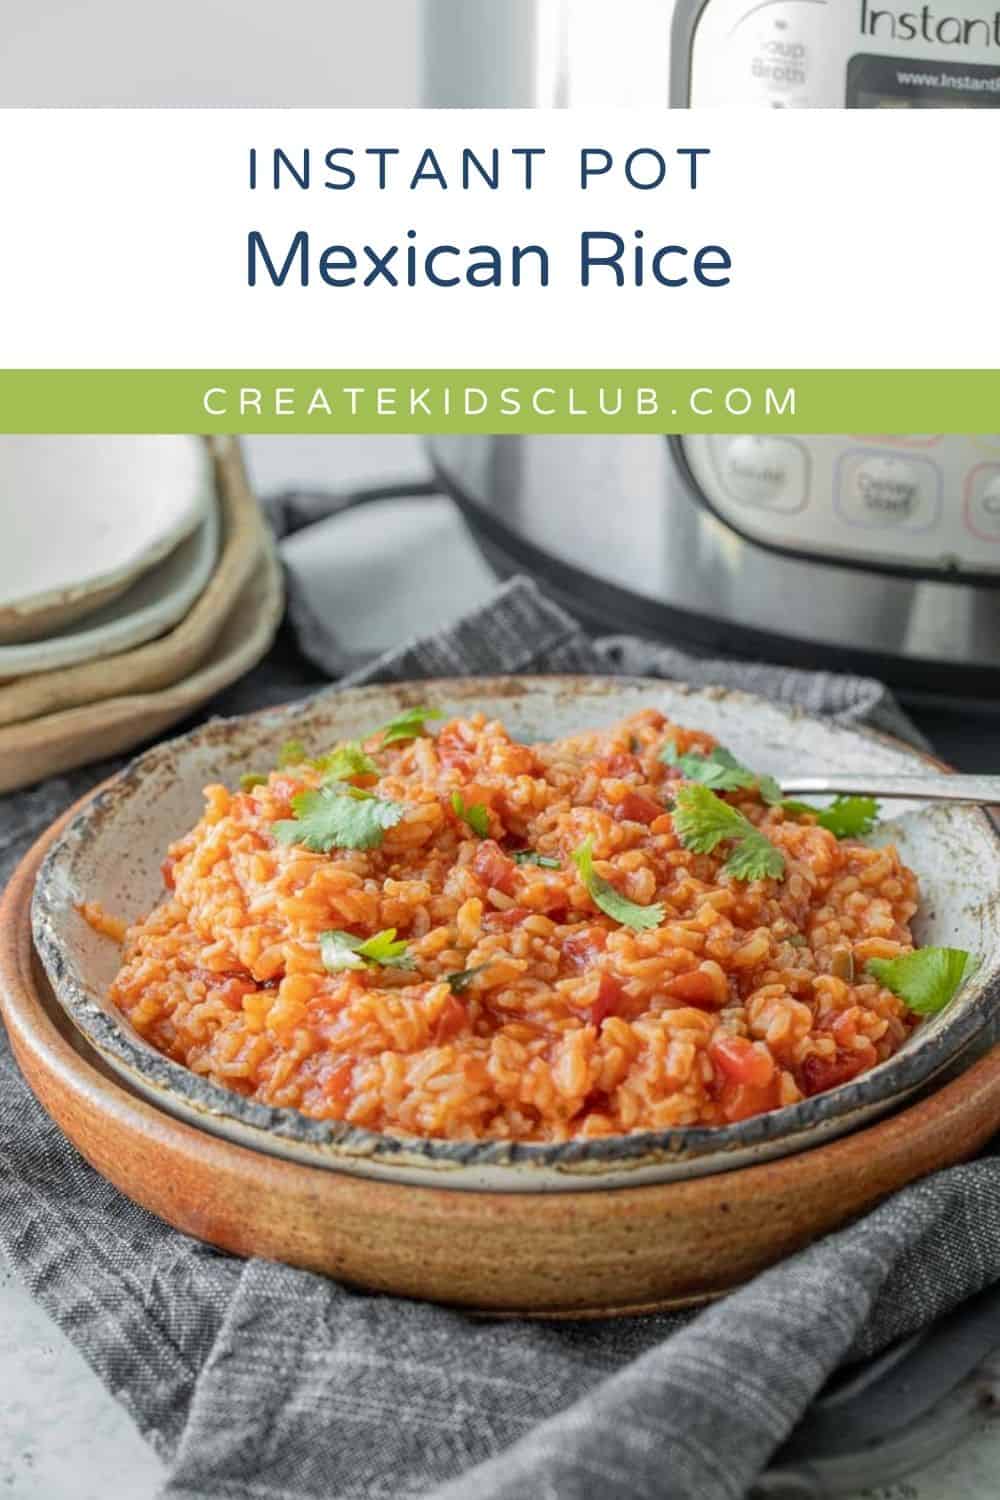 Pin of instant pot Mexican rice in a bowl.